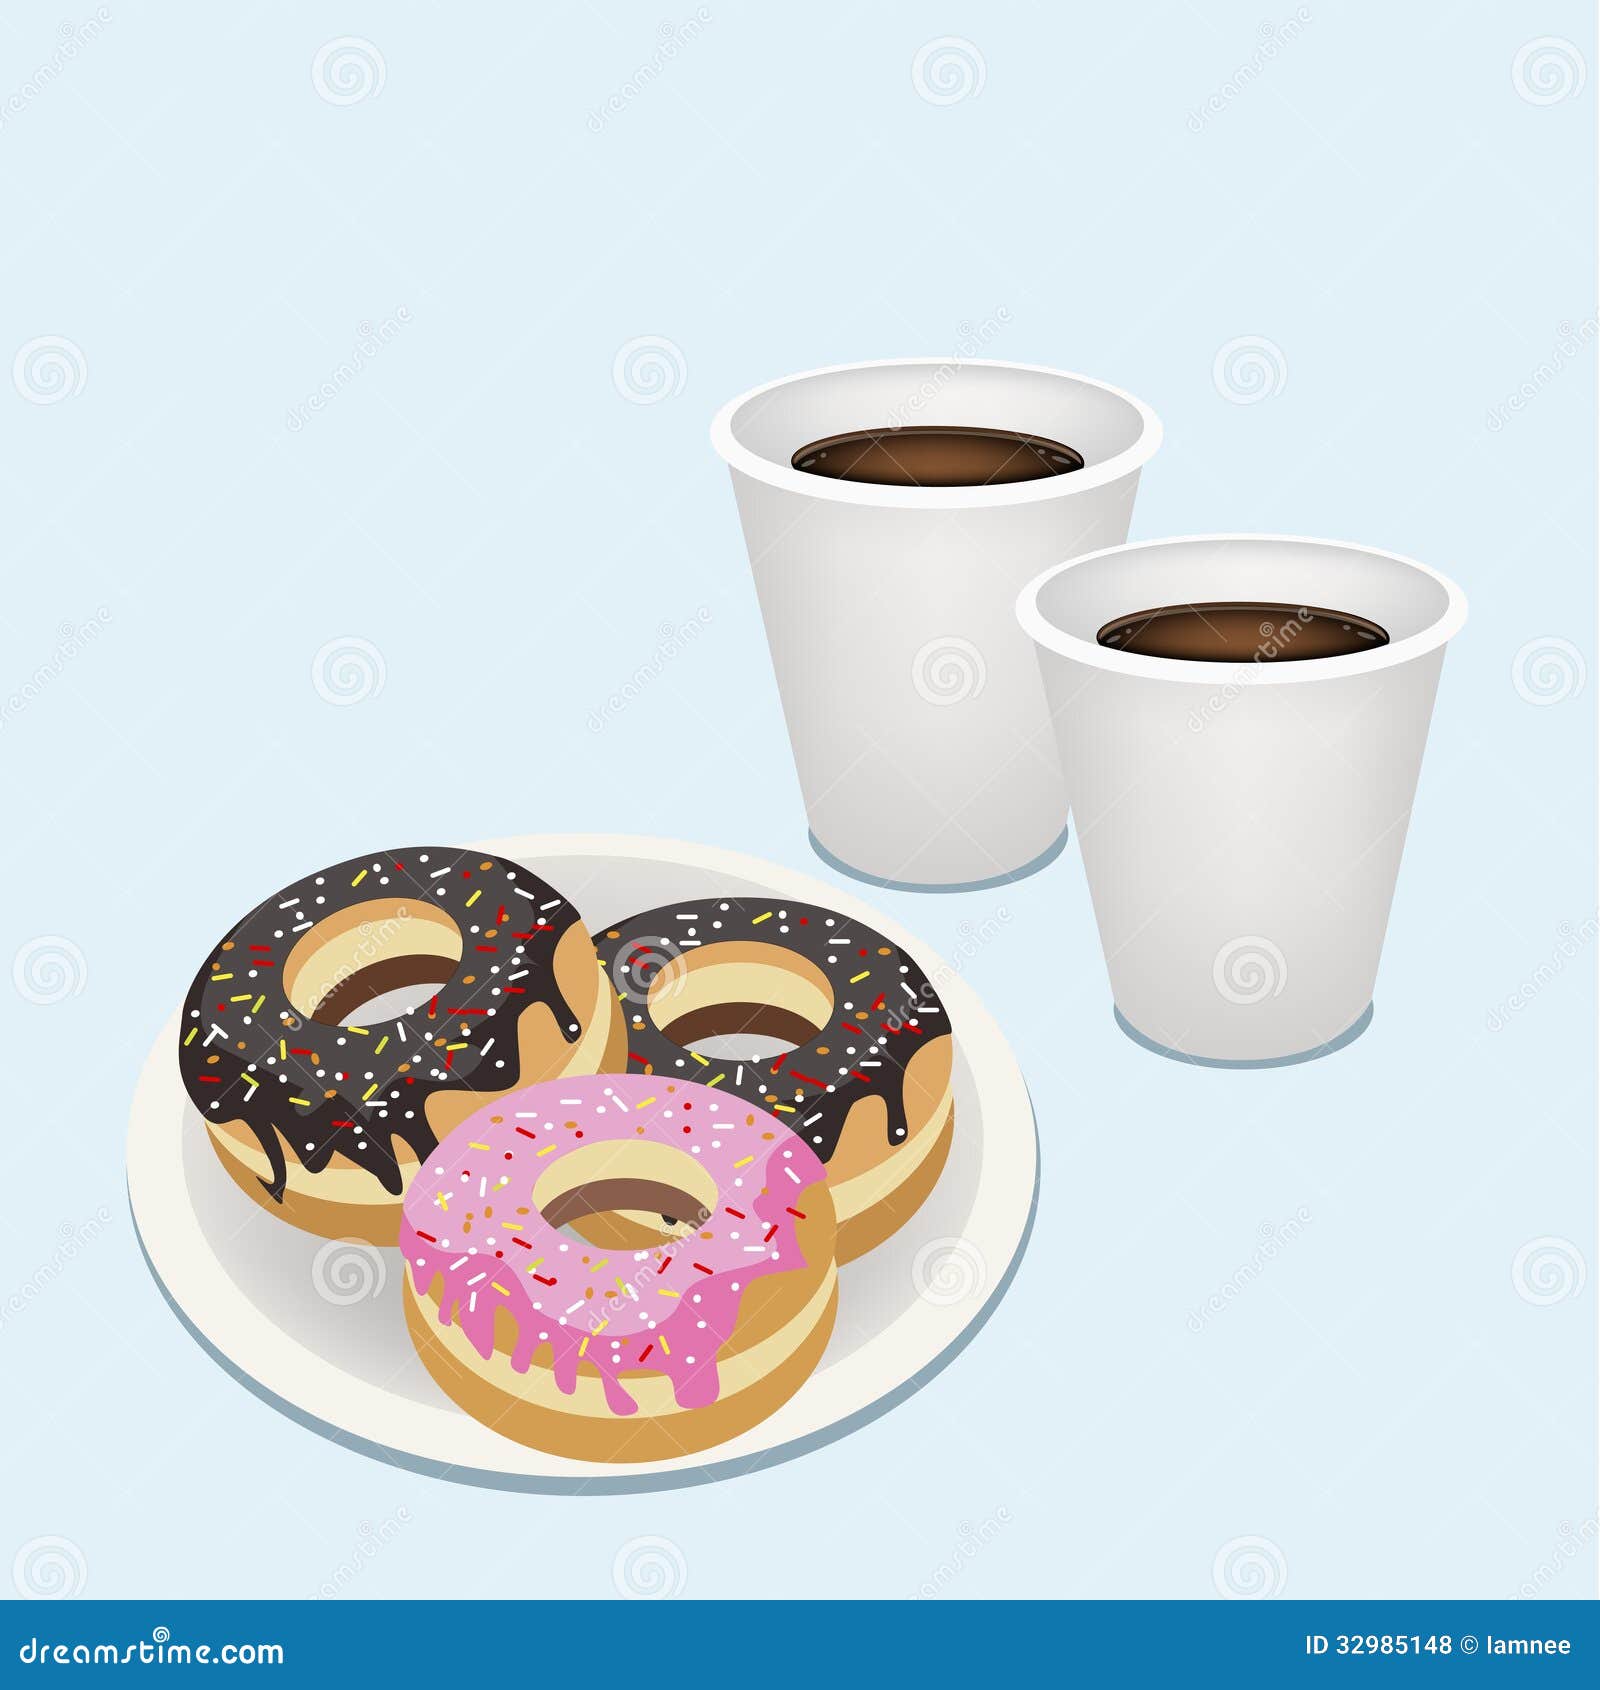 free clipart coffee and donuts - photo #45